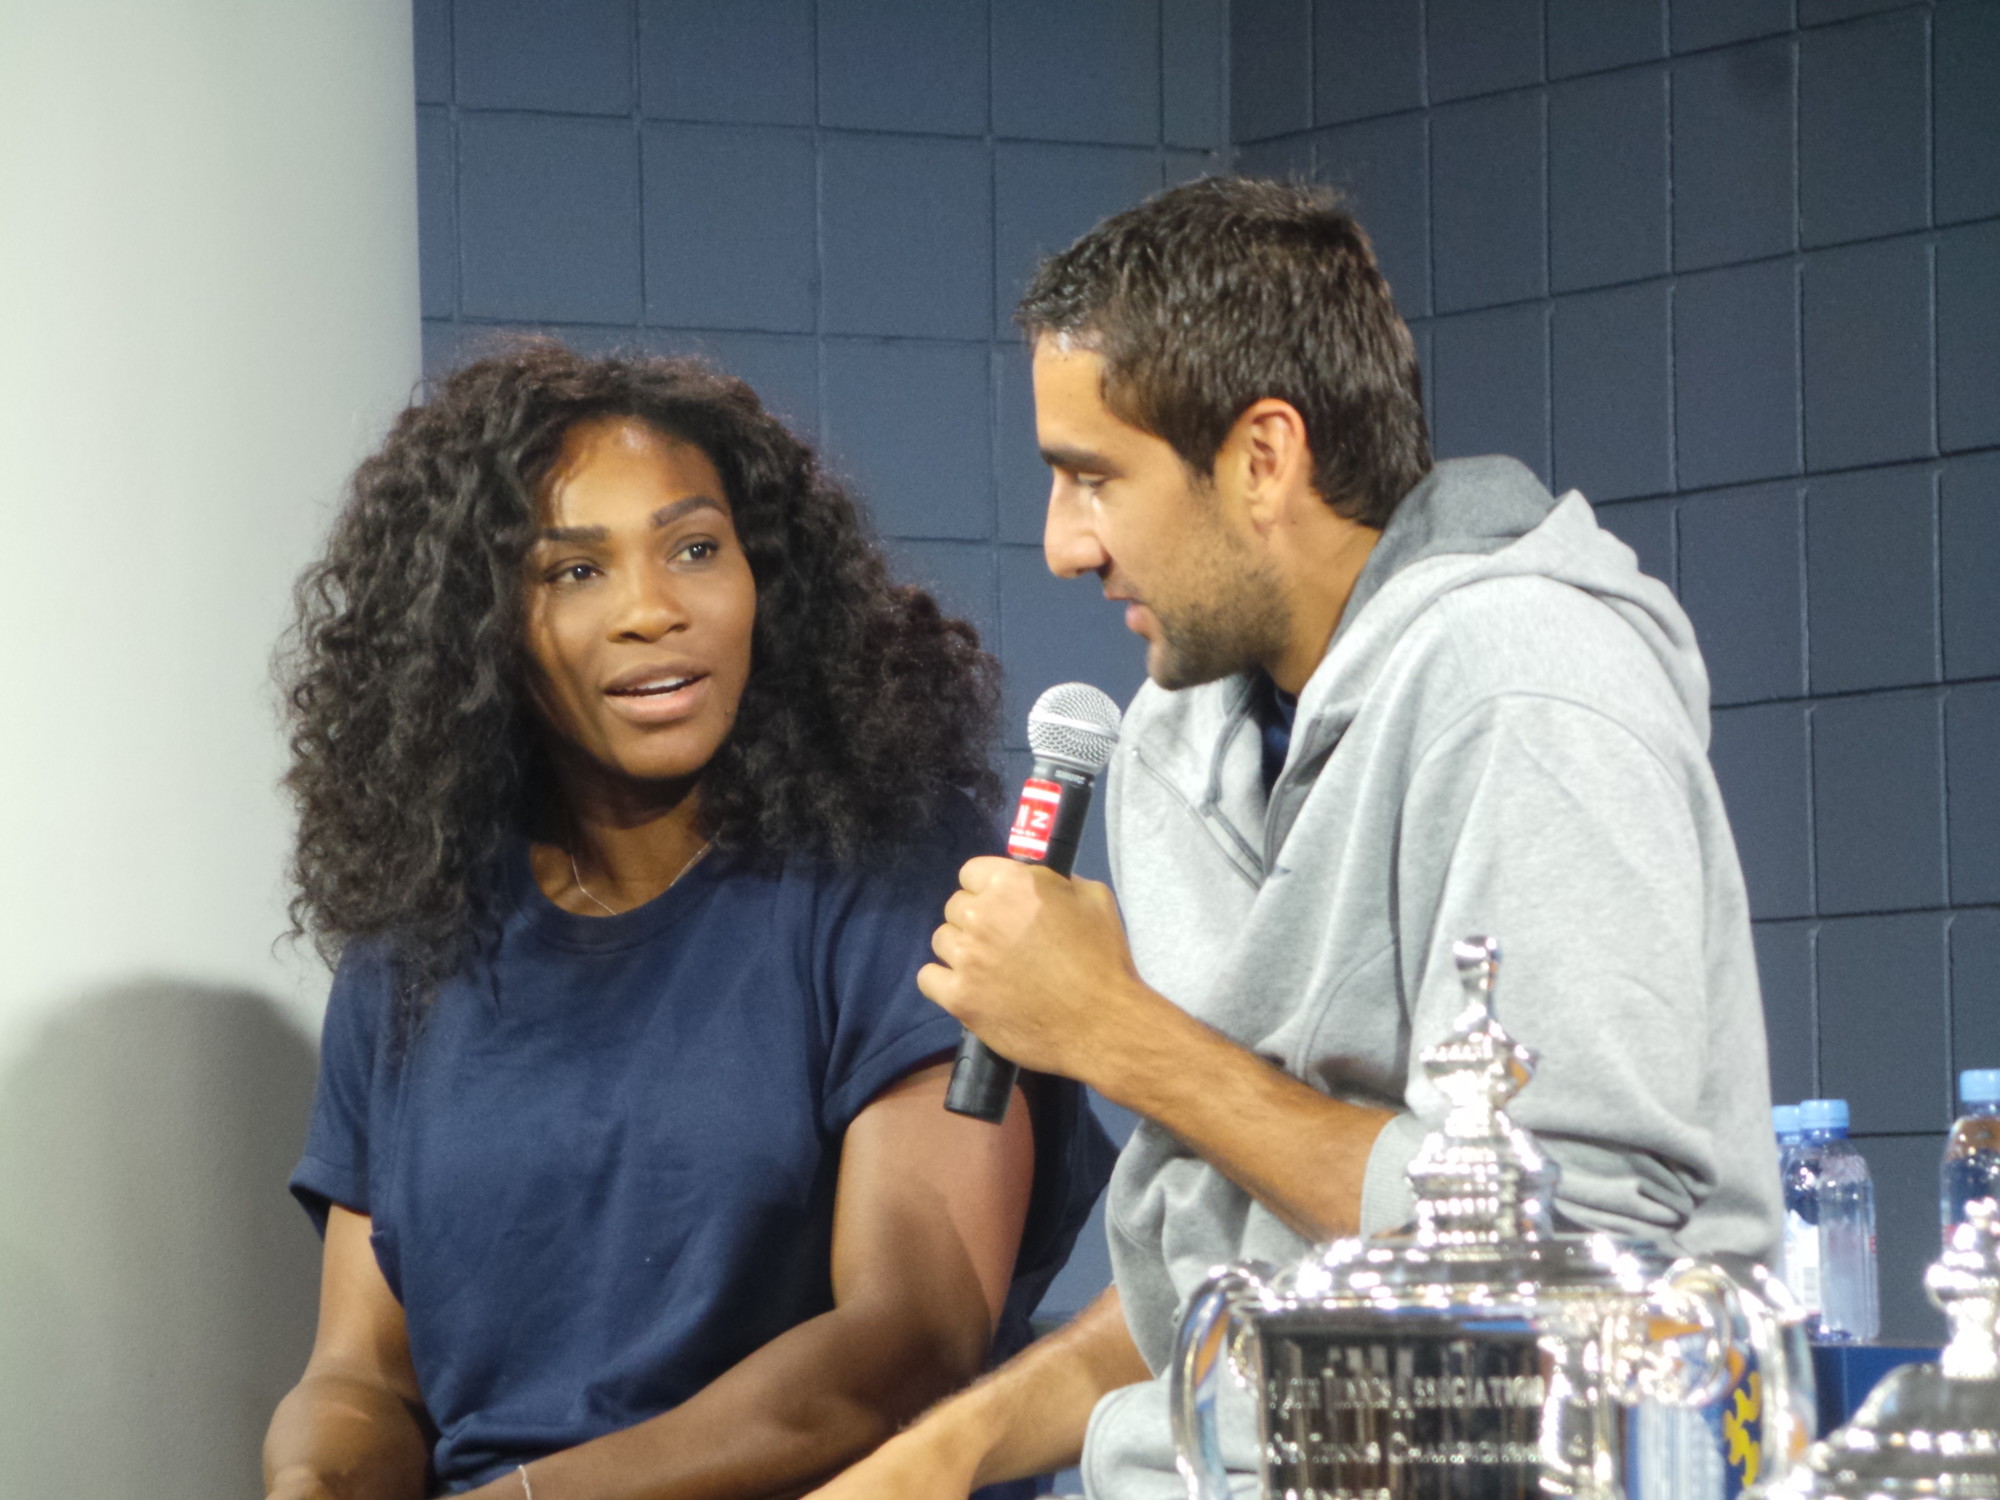 Serena Williams and Marin Cilic, last year’s U.S. Open winners, answered questions about this year’s tournament at a press conference last week.